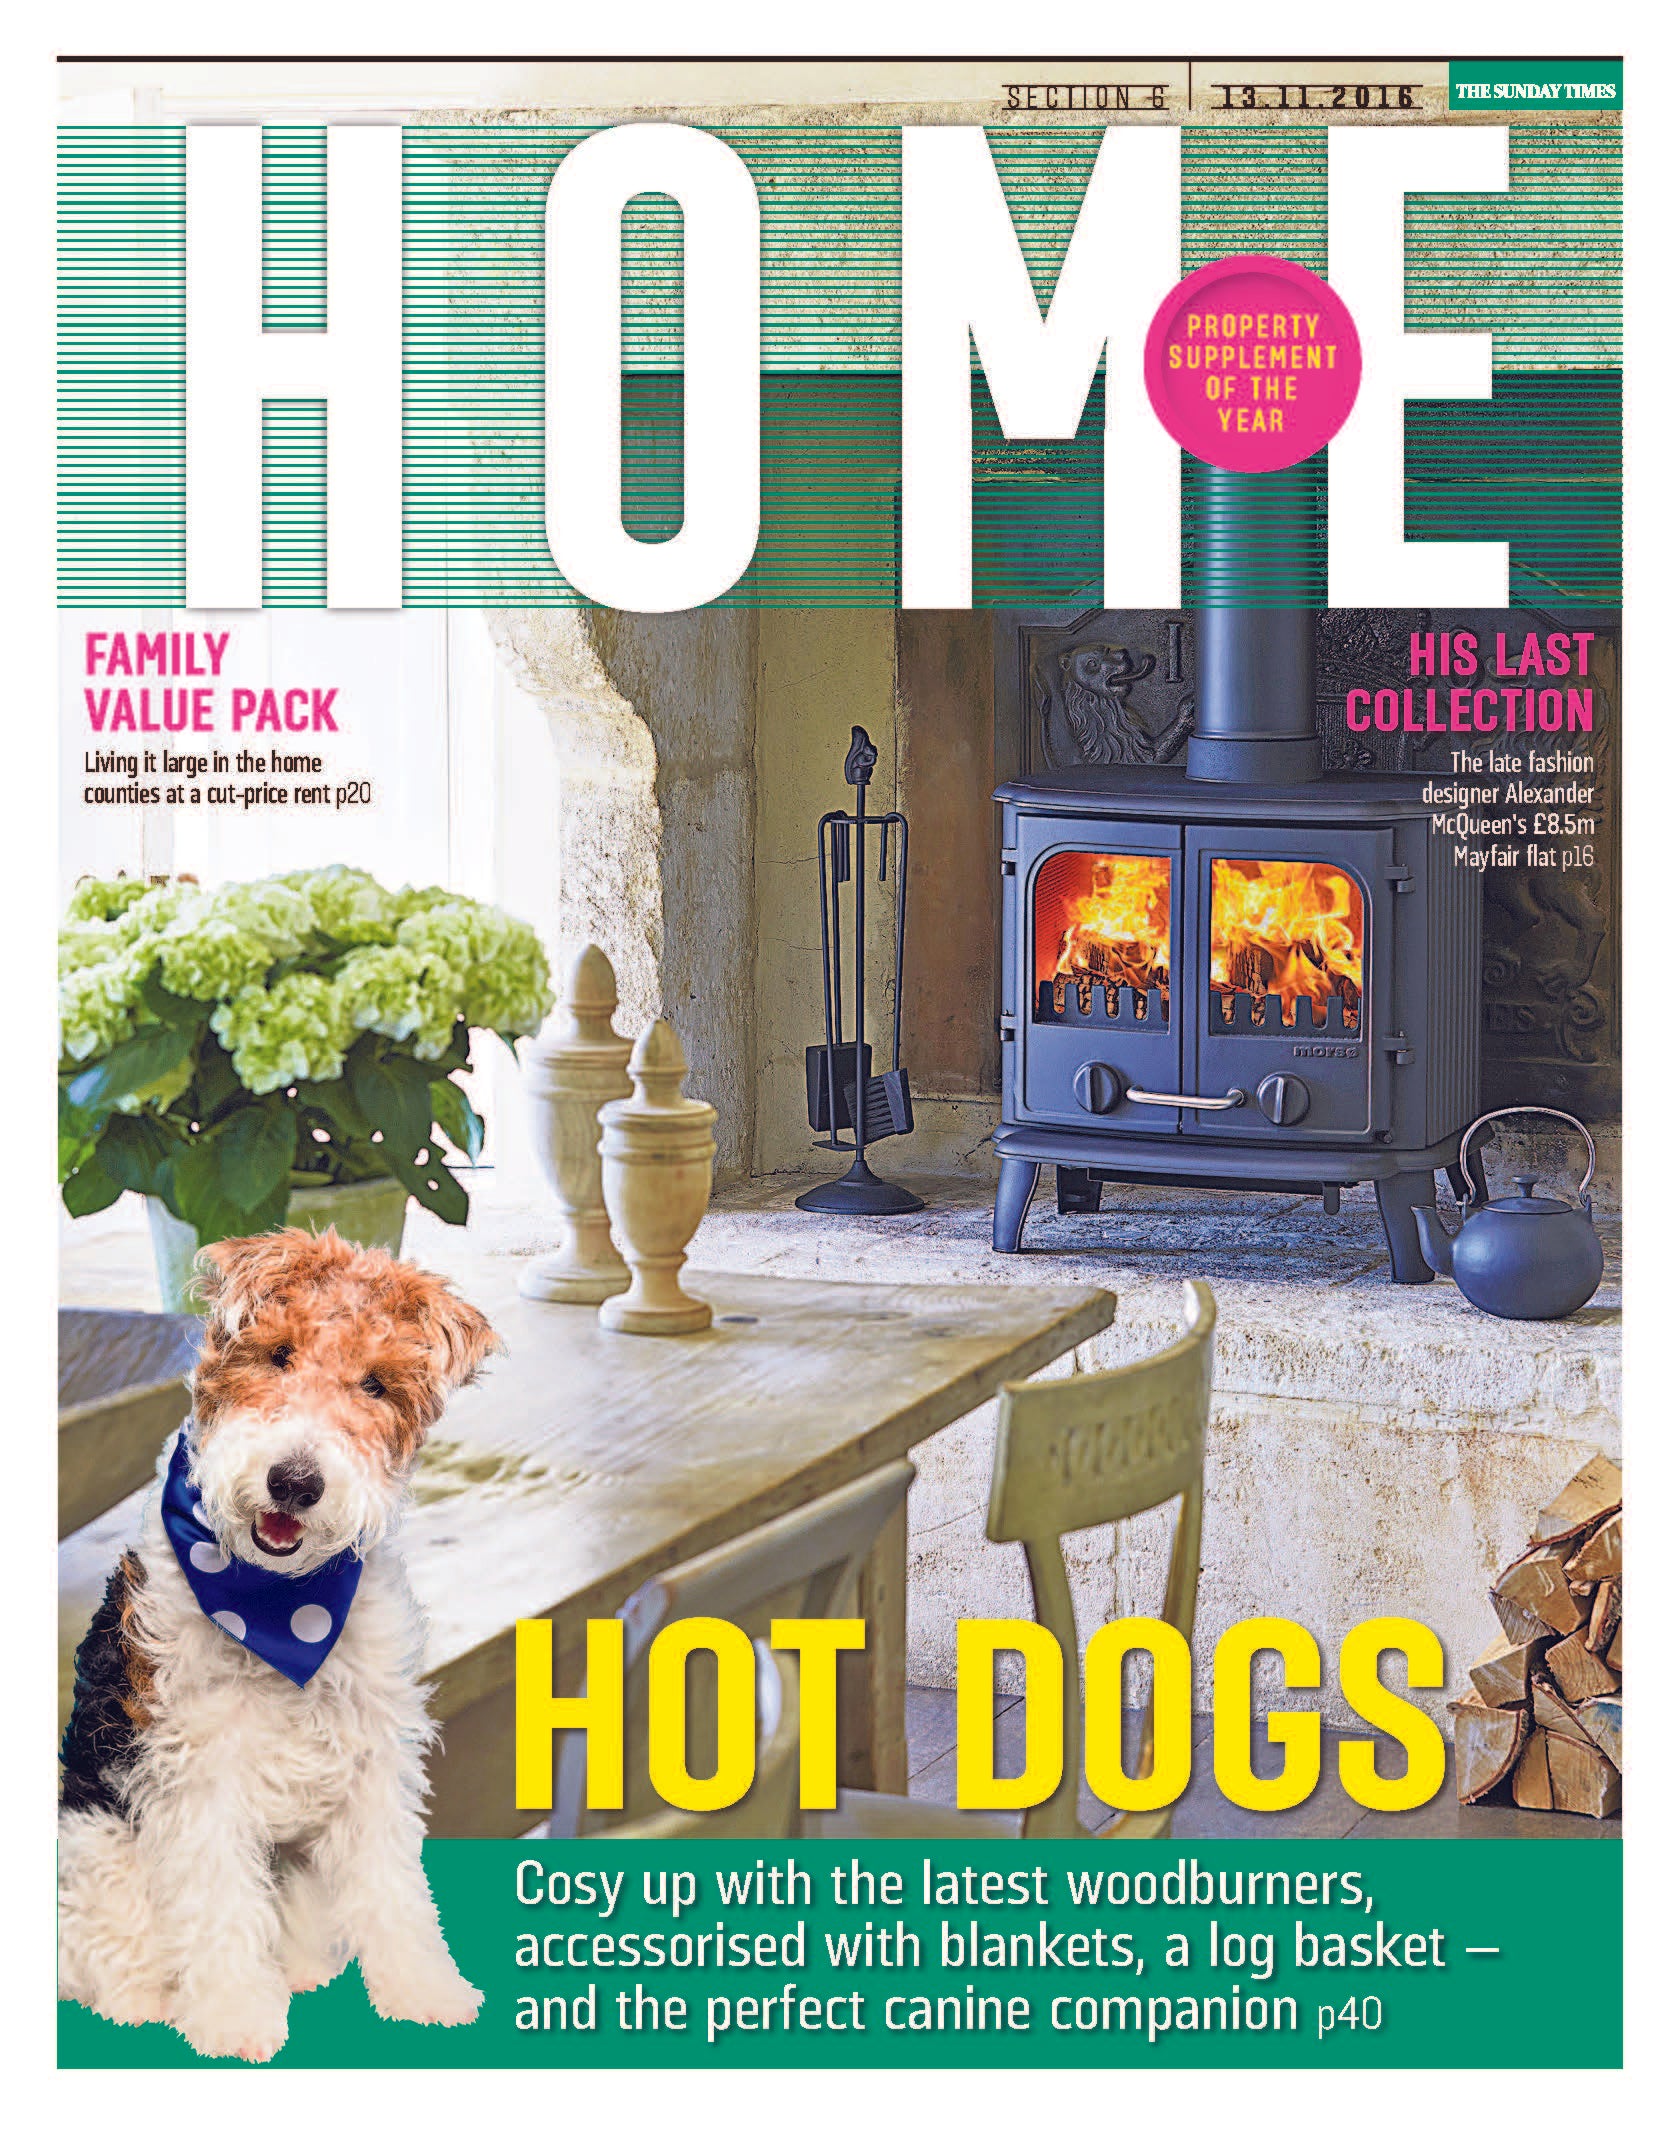 dog, dogs, style, magazine, press, editorial, home, hot, dogs, furnace